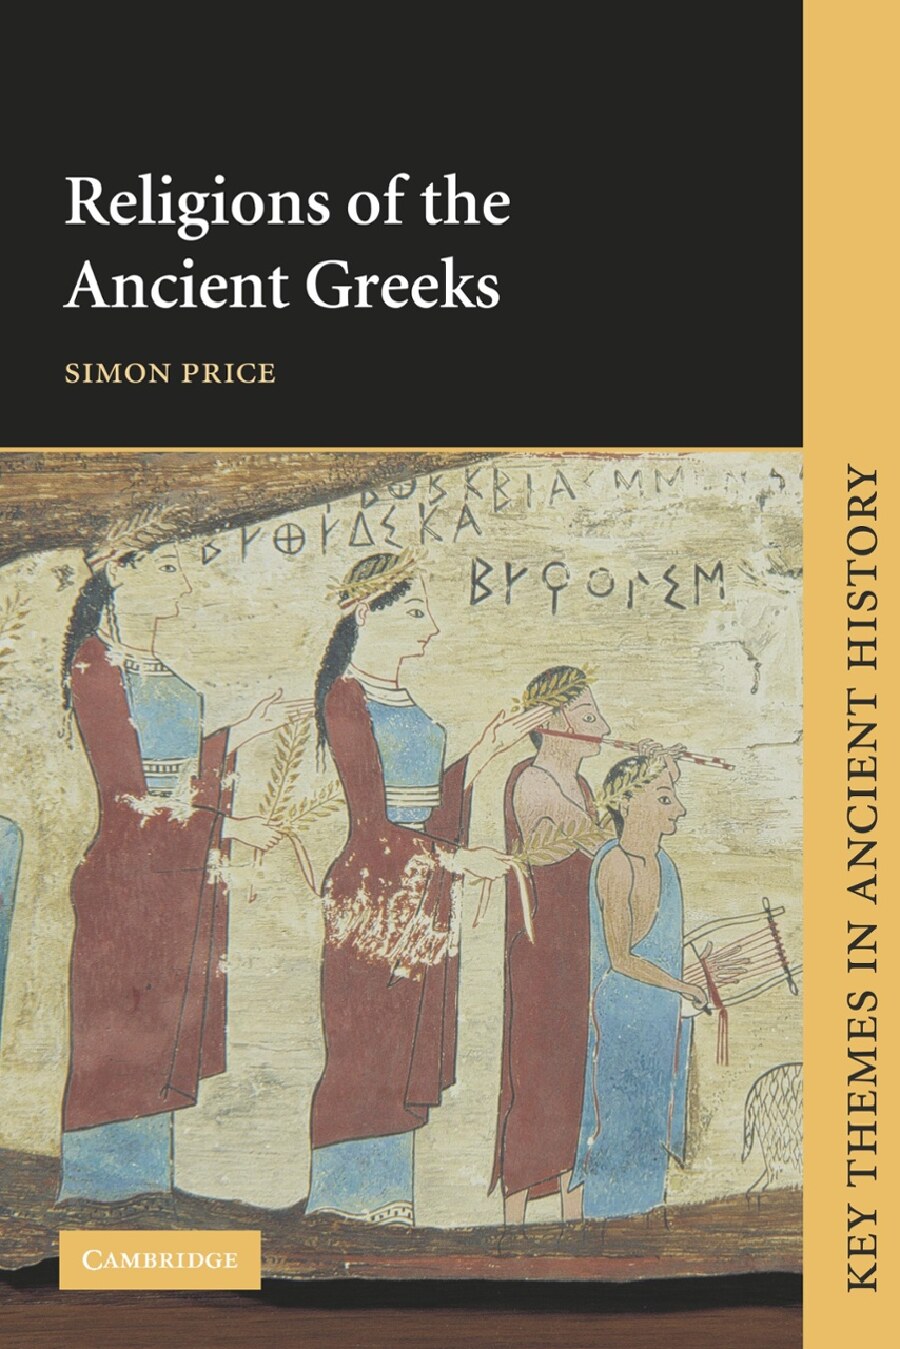 Religions of the Ancient Greeks by Simon Price (z-lib.org)